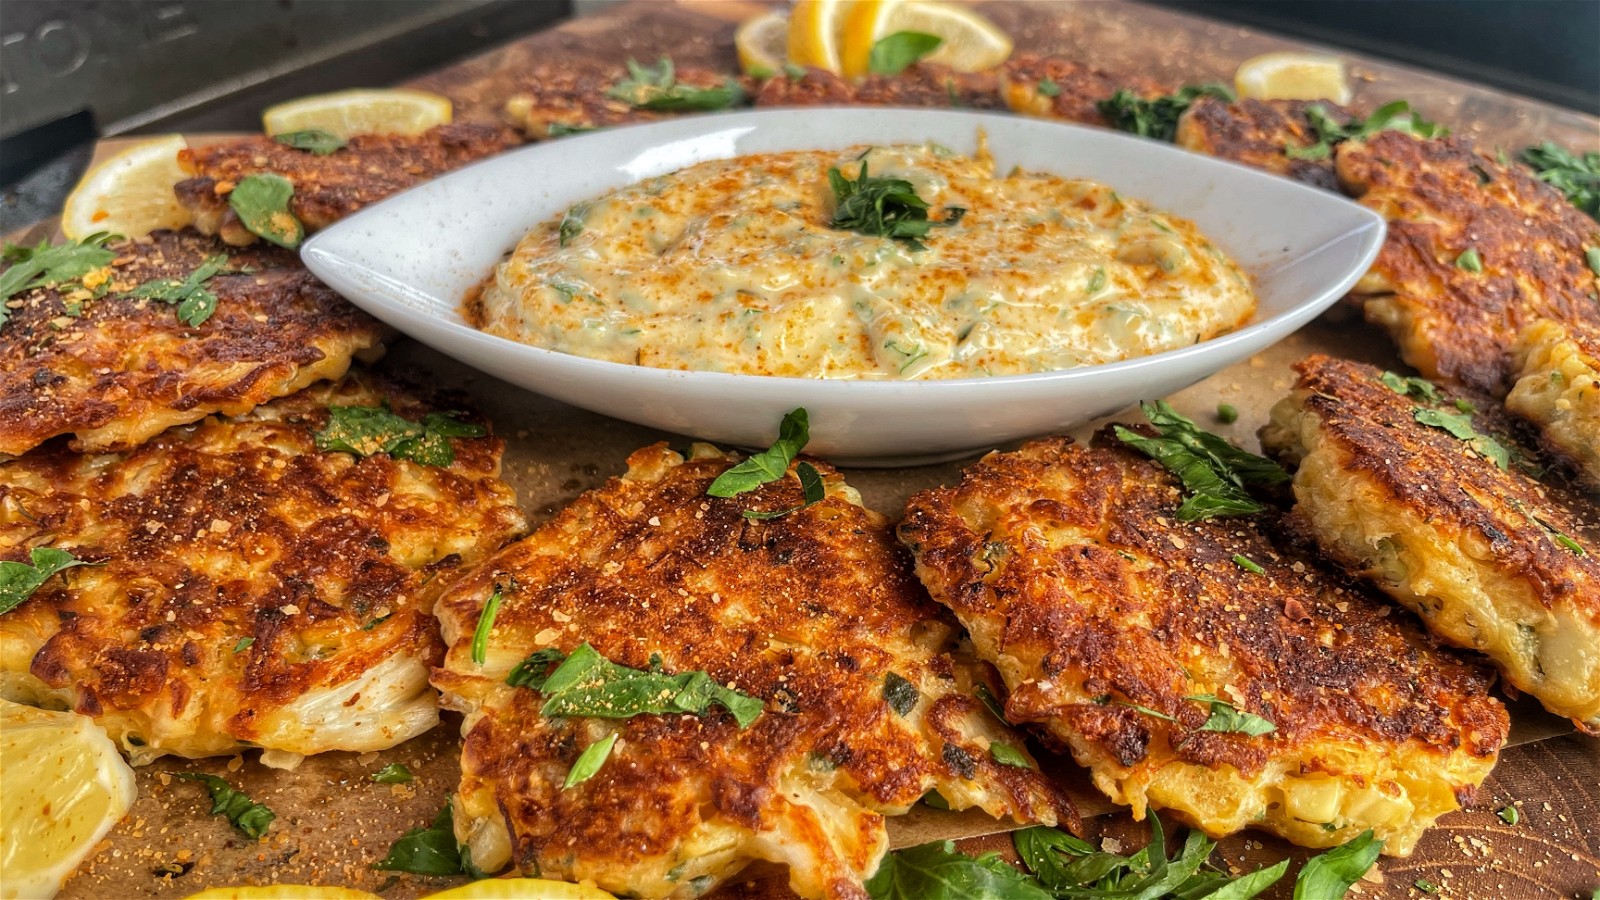 Image of Cheesy Crab and Corn Fritters